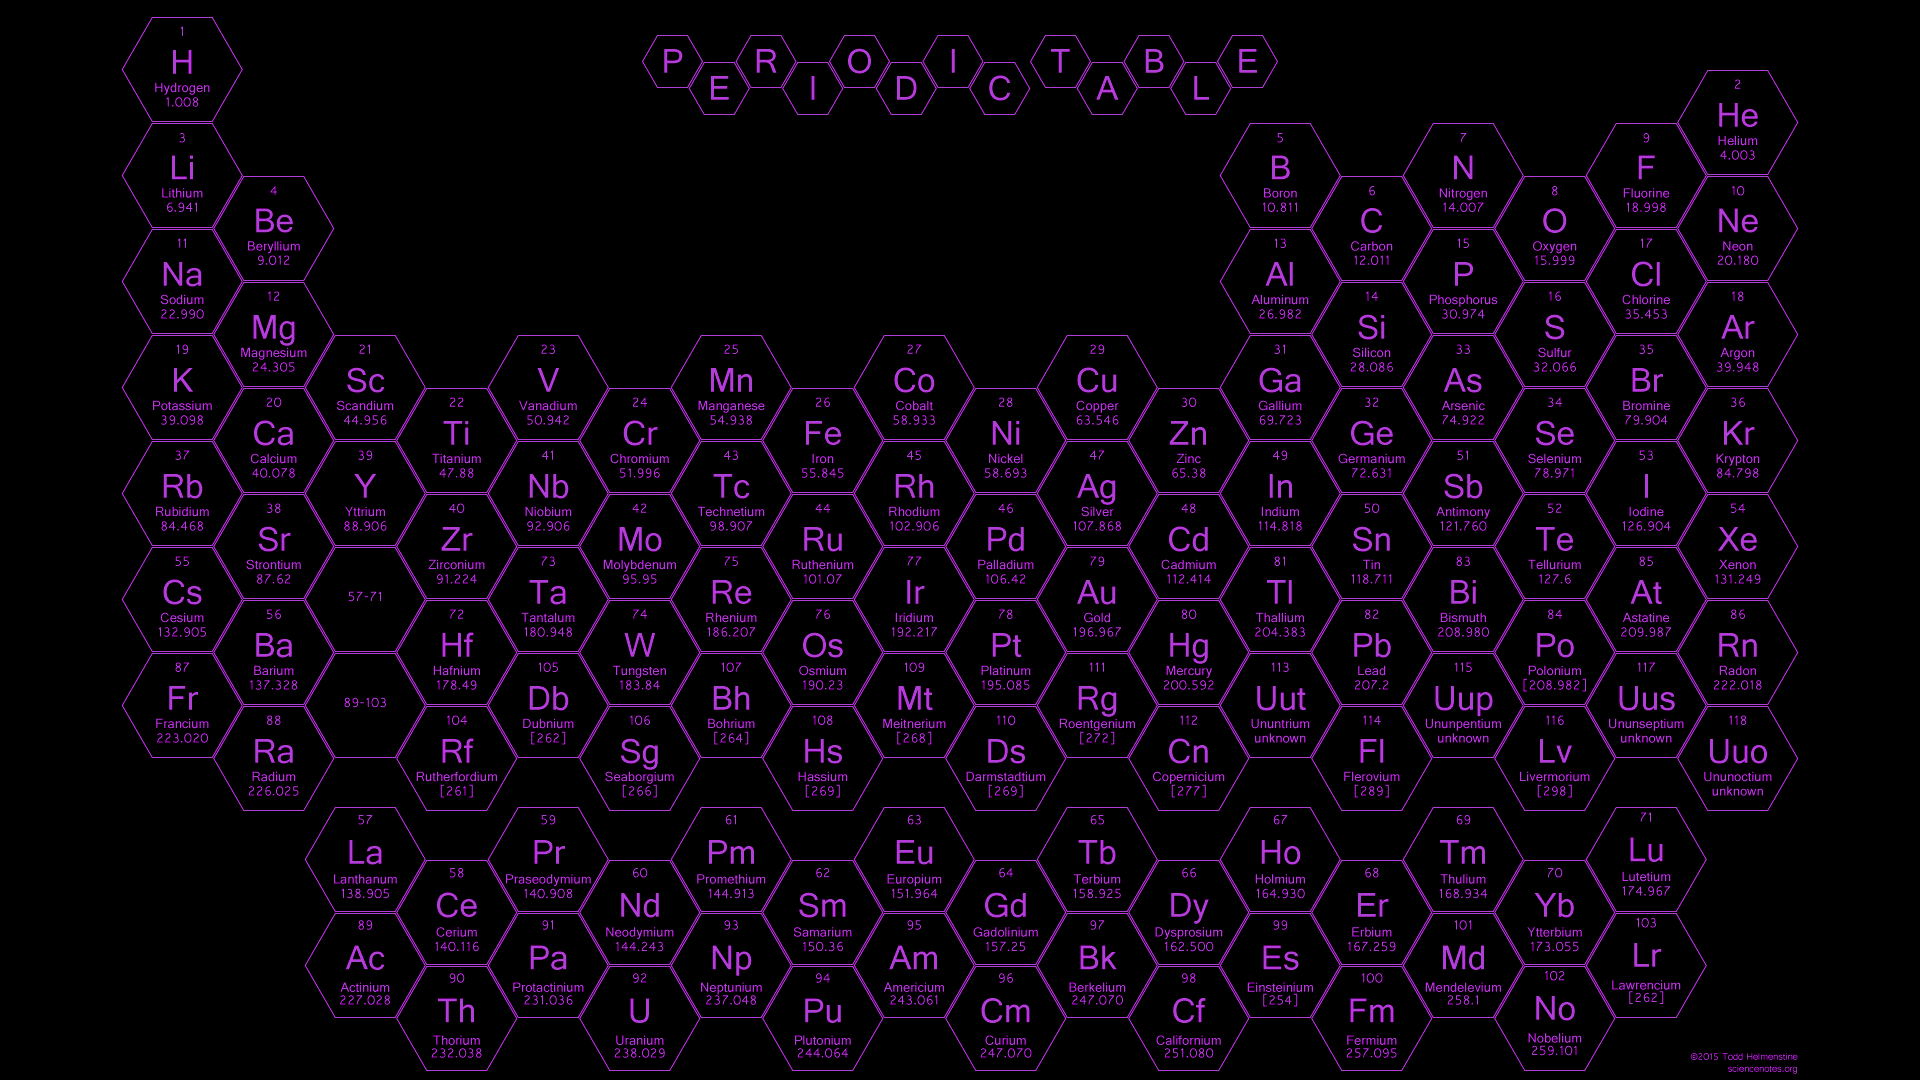 Glowing Purple Hexagons And Text Give This Periodic Table A Royal